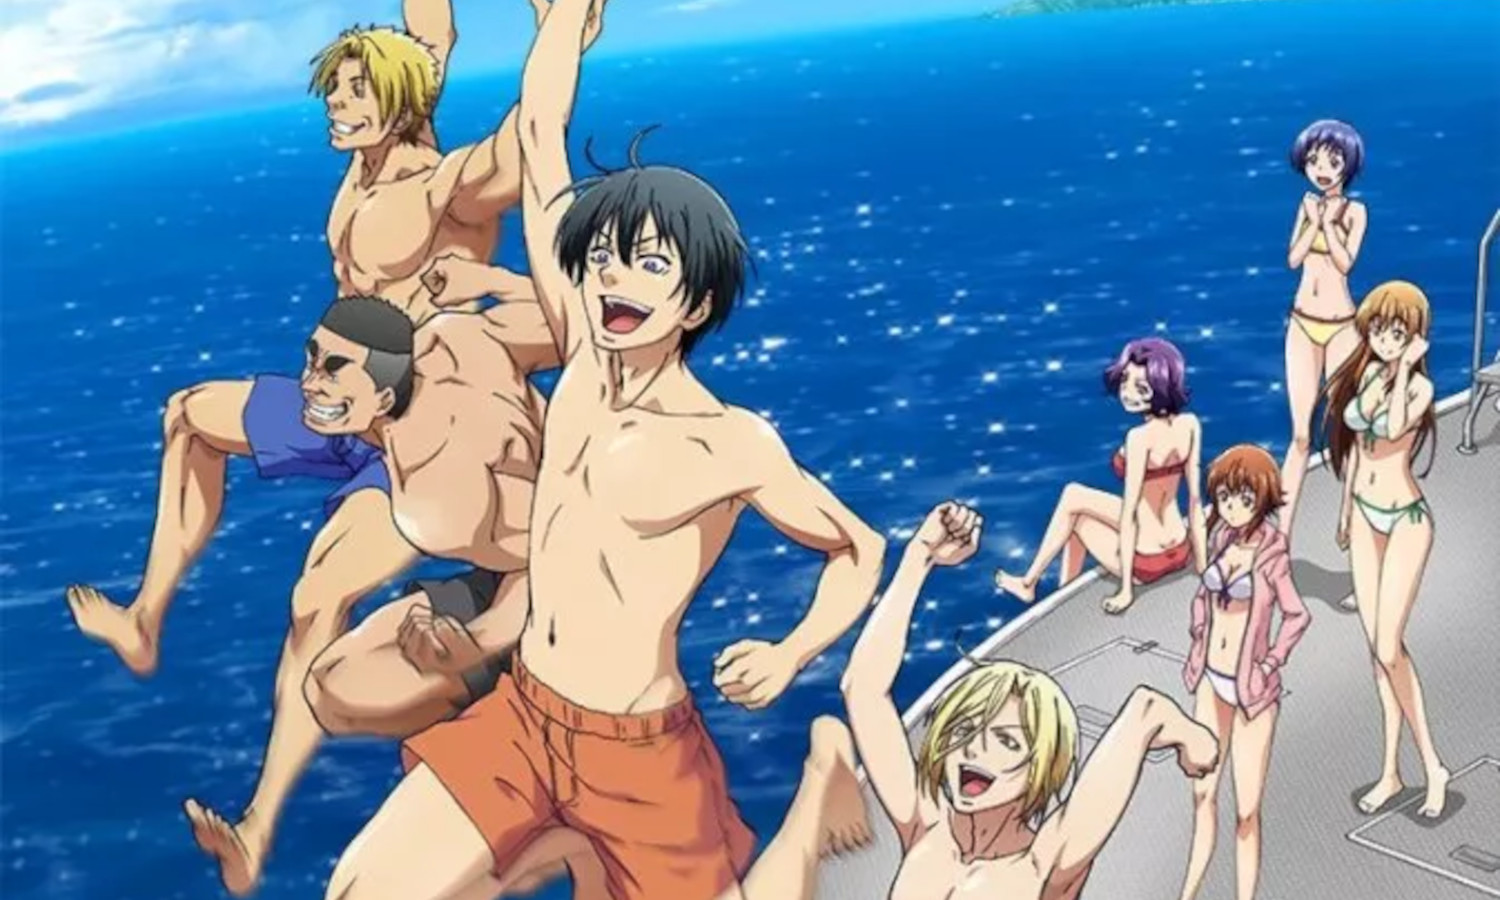 Grand blue - One of the best comedy anime - Recommendation